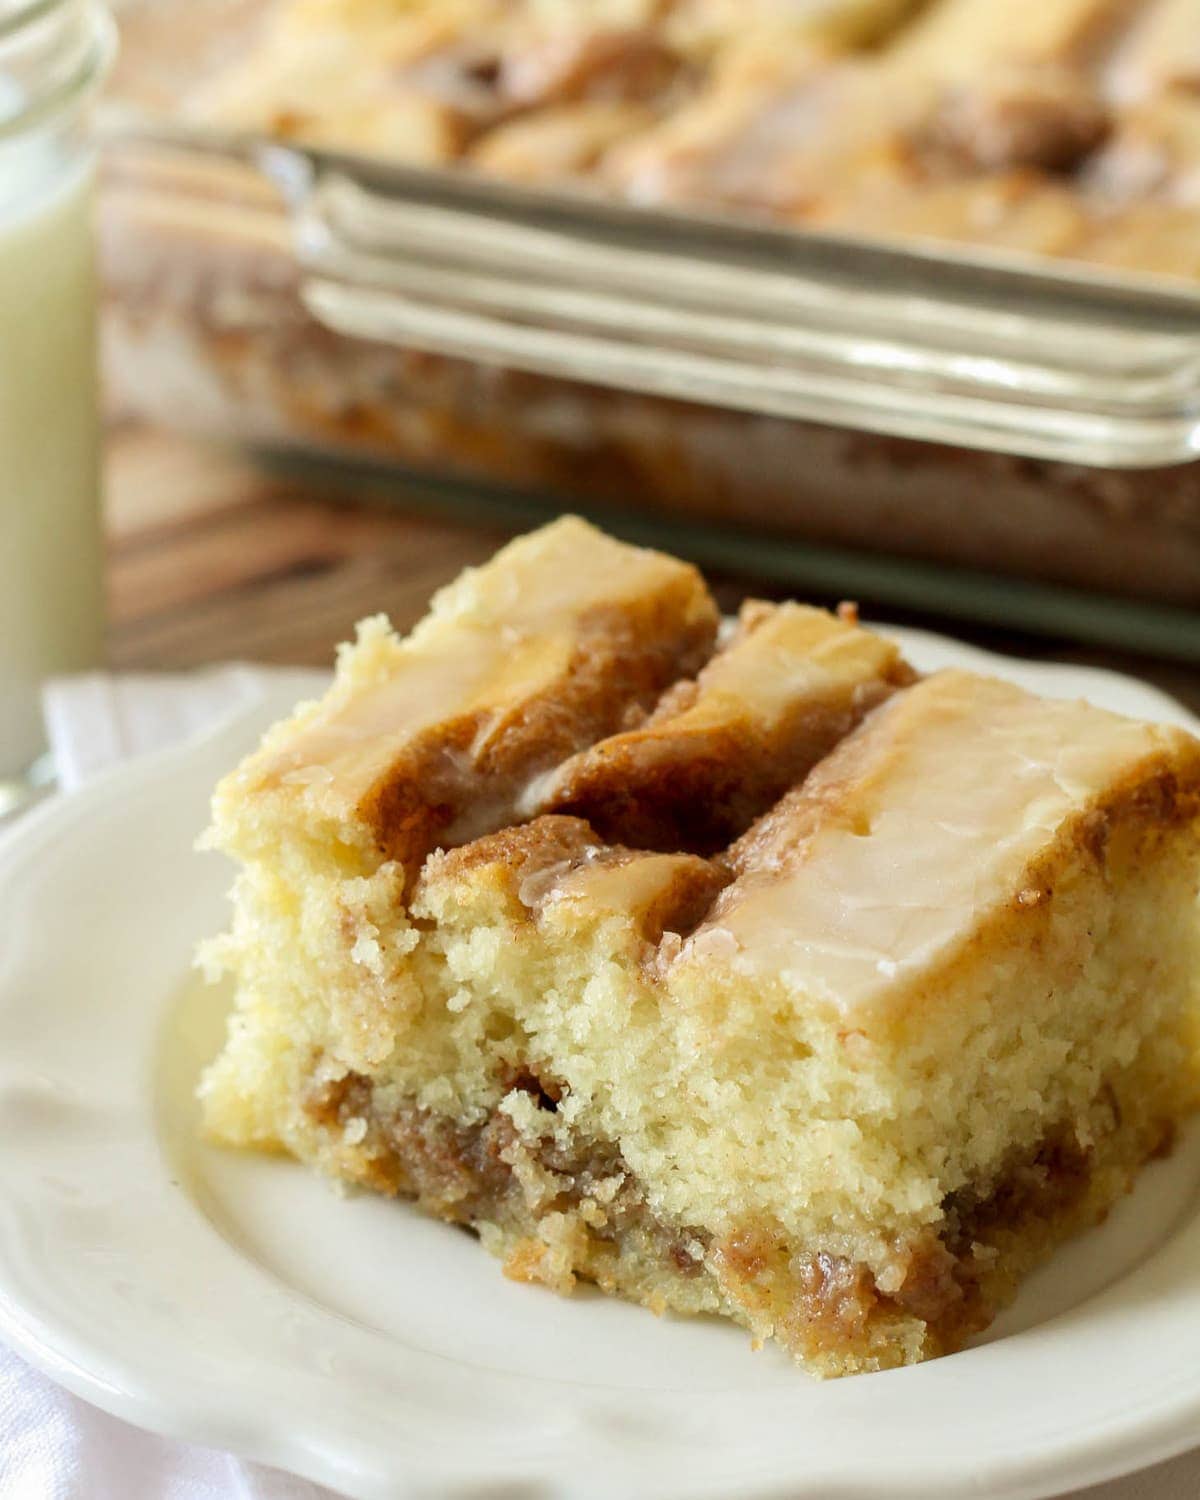 Cinnamon roll cake slice served on a white plate.